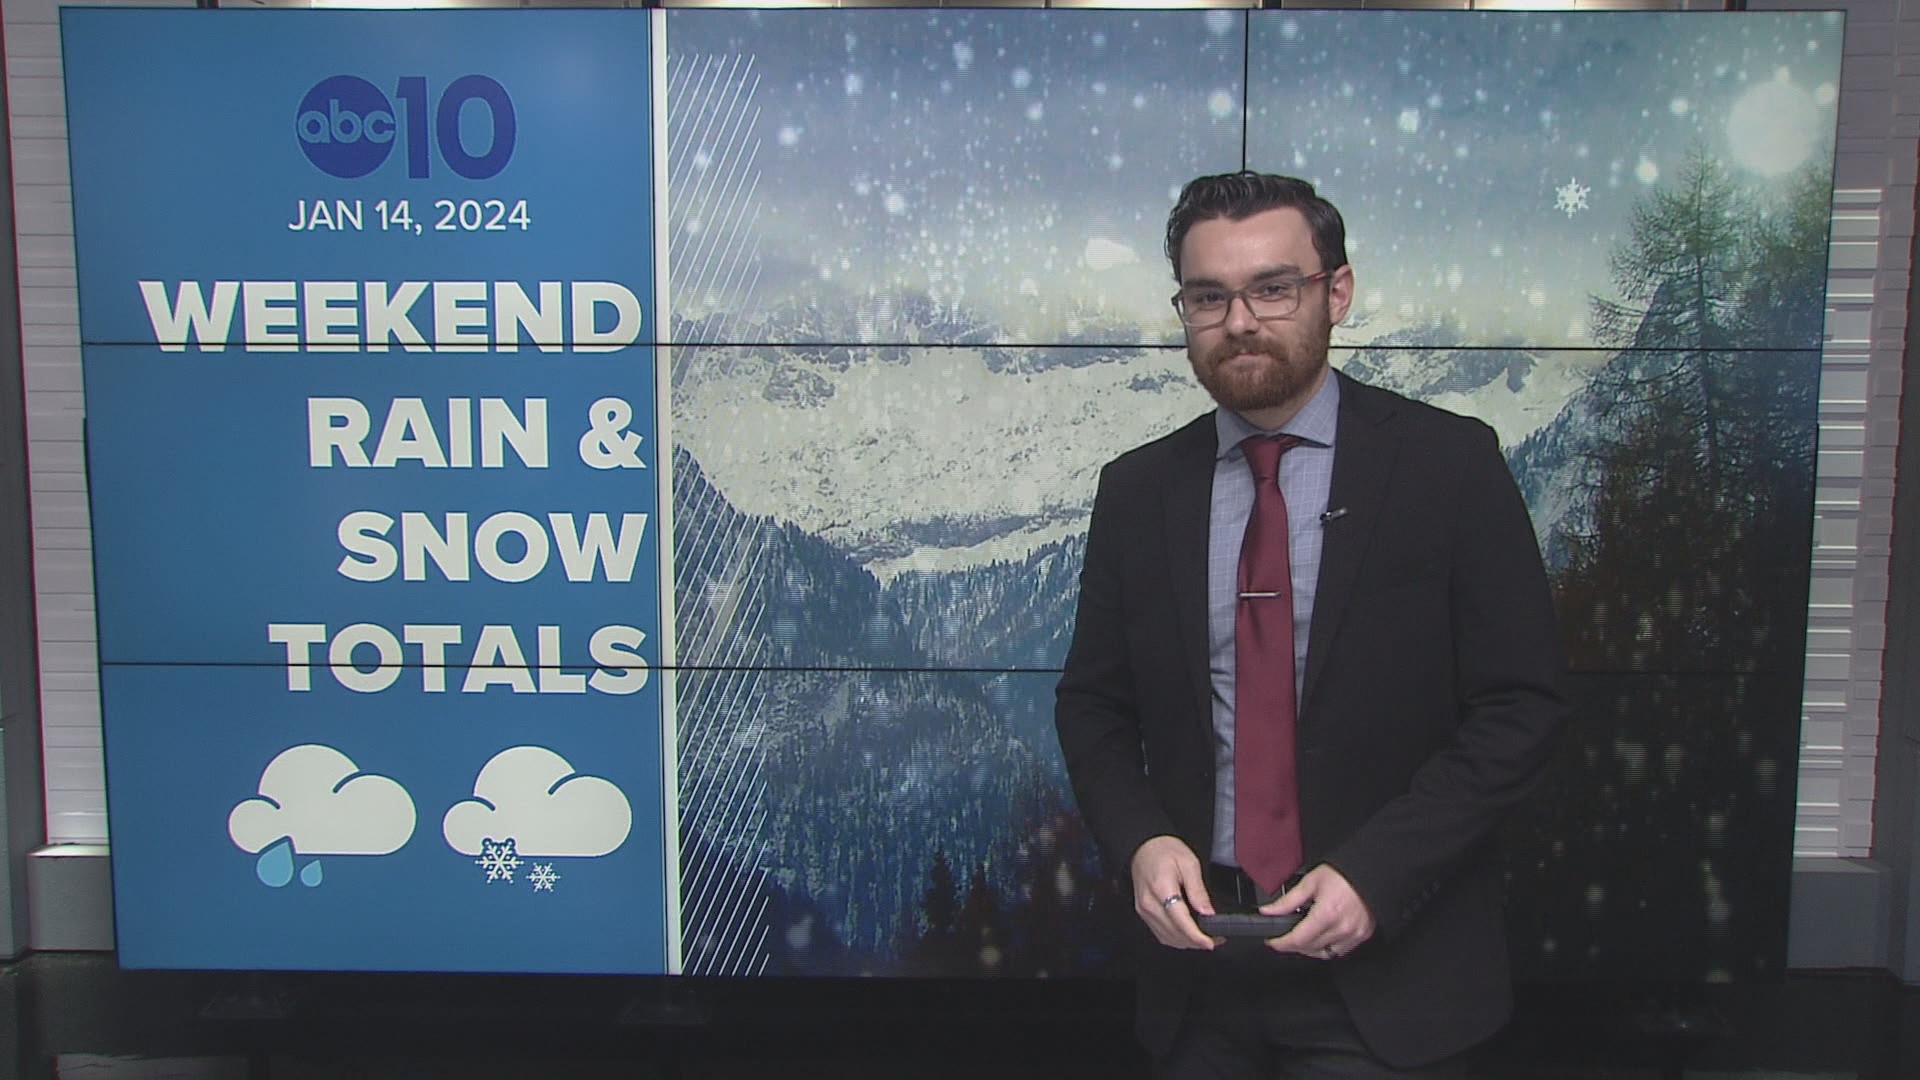 ABC10 meteorologist Brenden Mincheff breaks down how the weekend rain and snow helps our deficit and what's ahead.